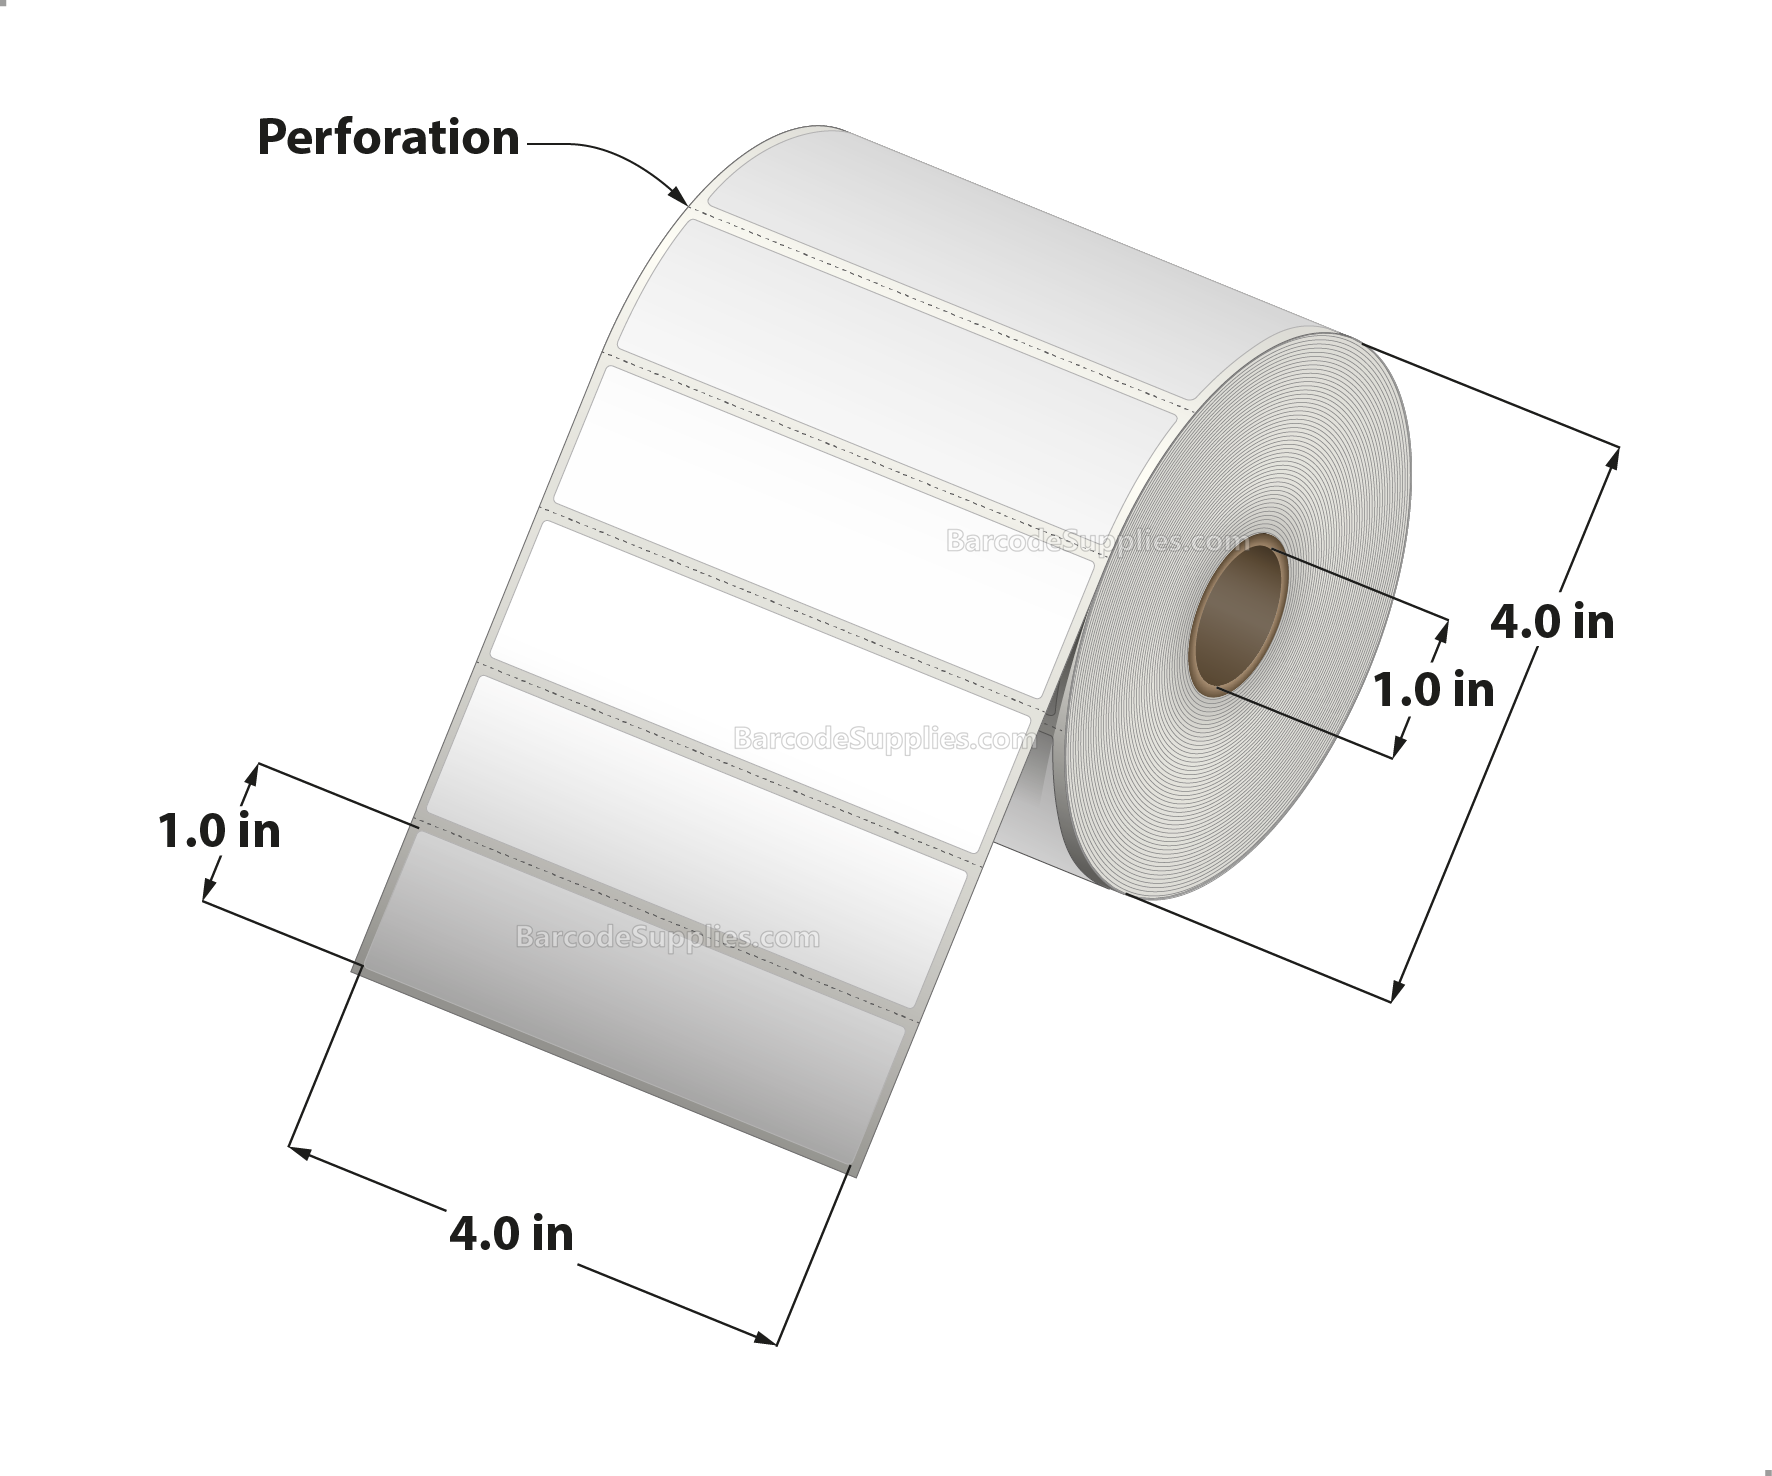 4 x 1 Direct Thermal White Labels With Permanent Acrylic Adhesive - Perforated - 1310 Labels Per Roll - Carton Of 4 Rolls - 5240 Labels Total - MPN: DT41-14PDT